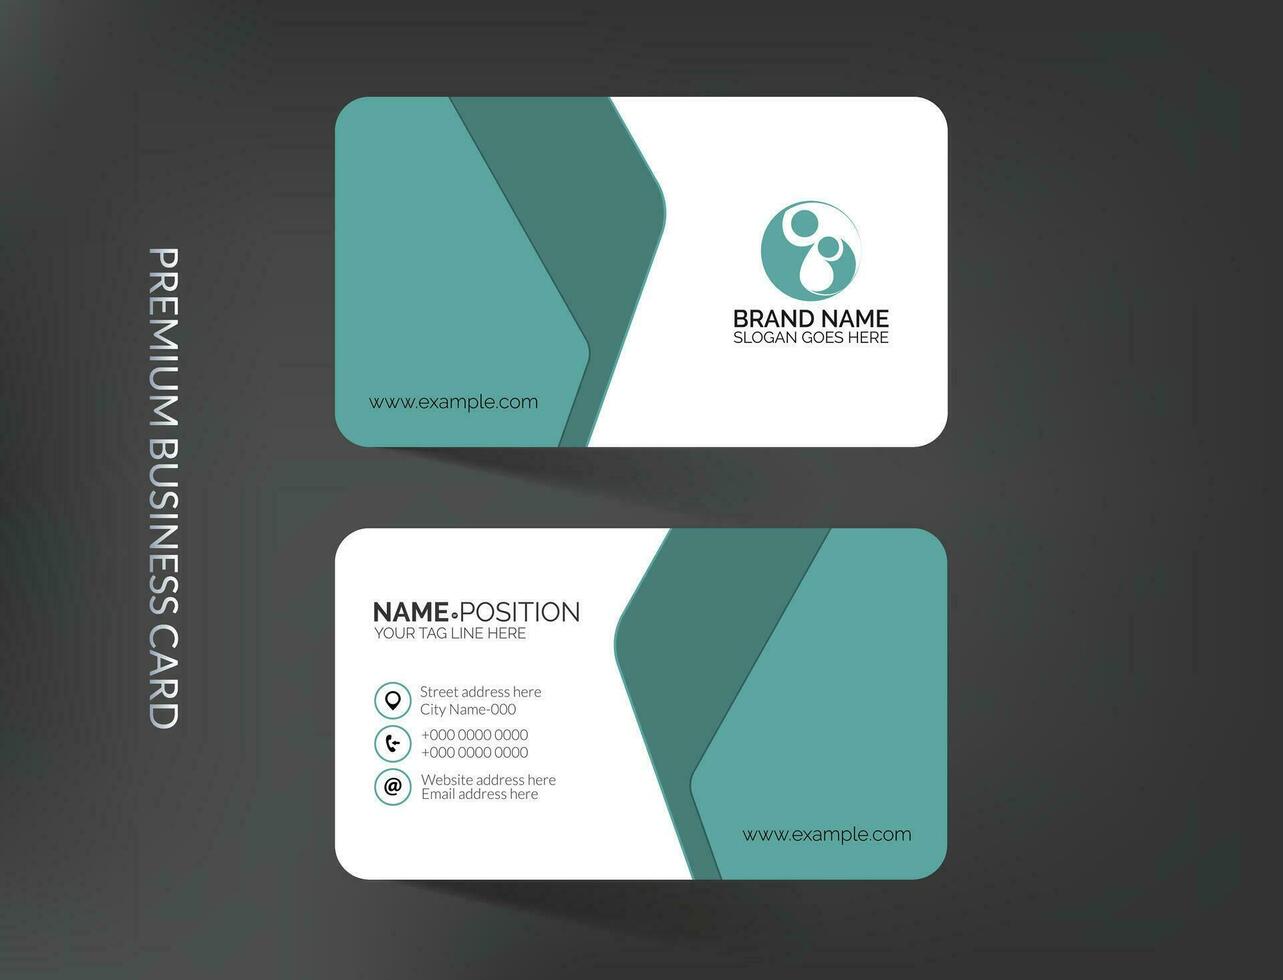 Modern and stylish business card template with mockup vector design